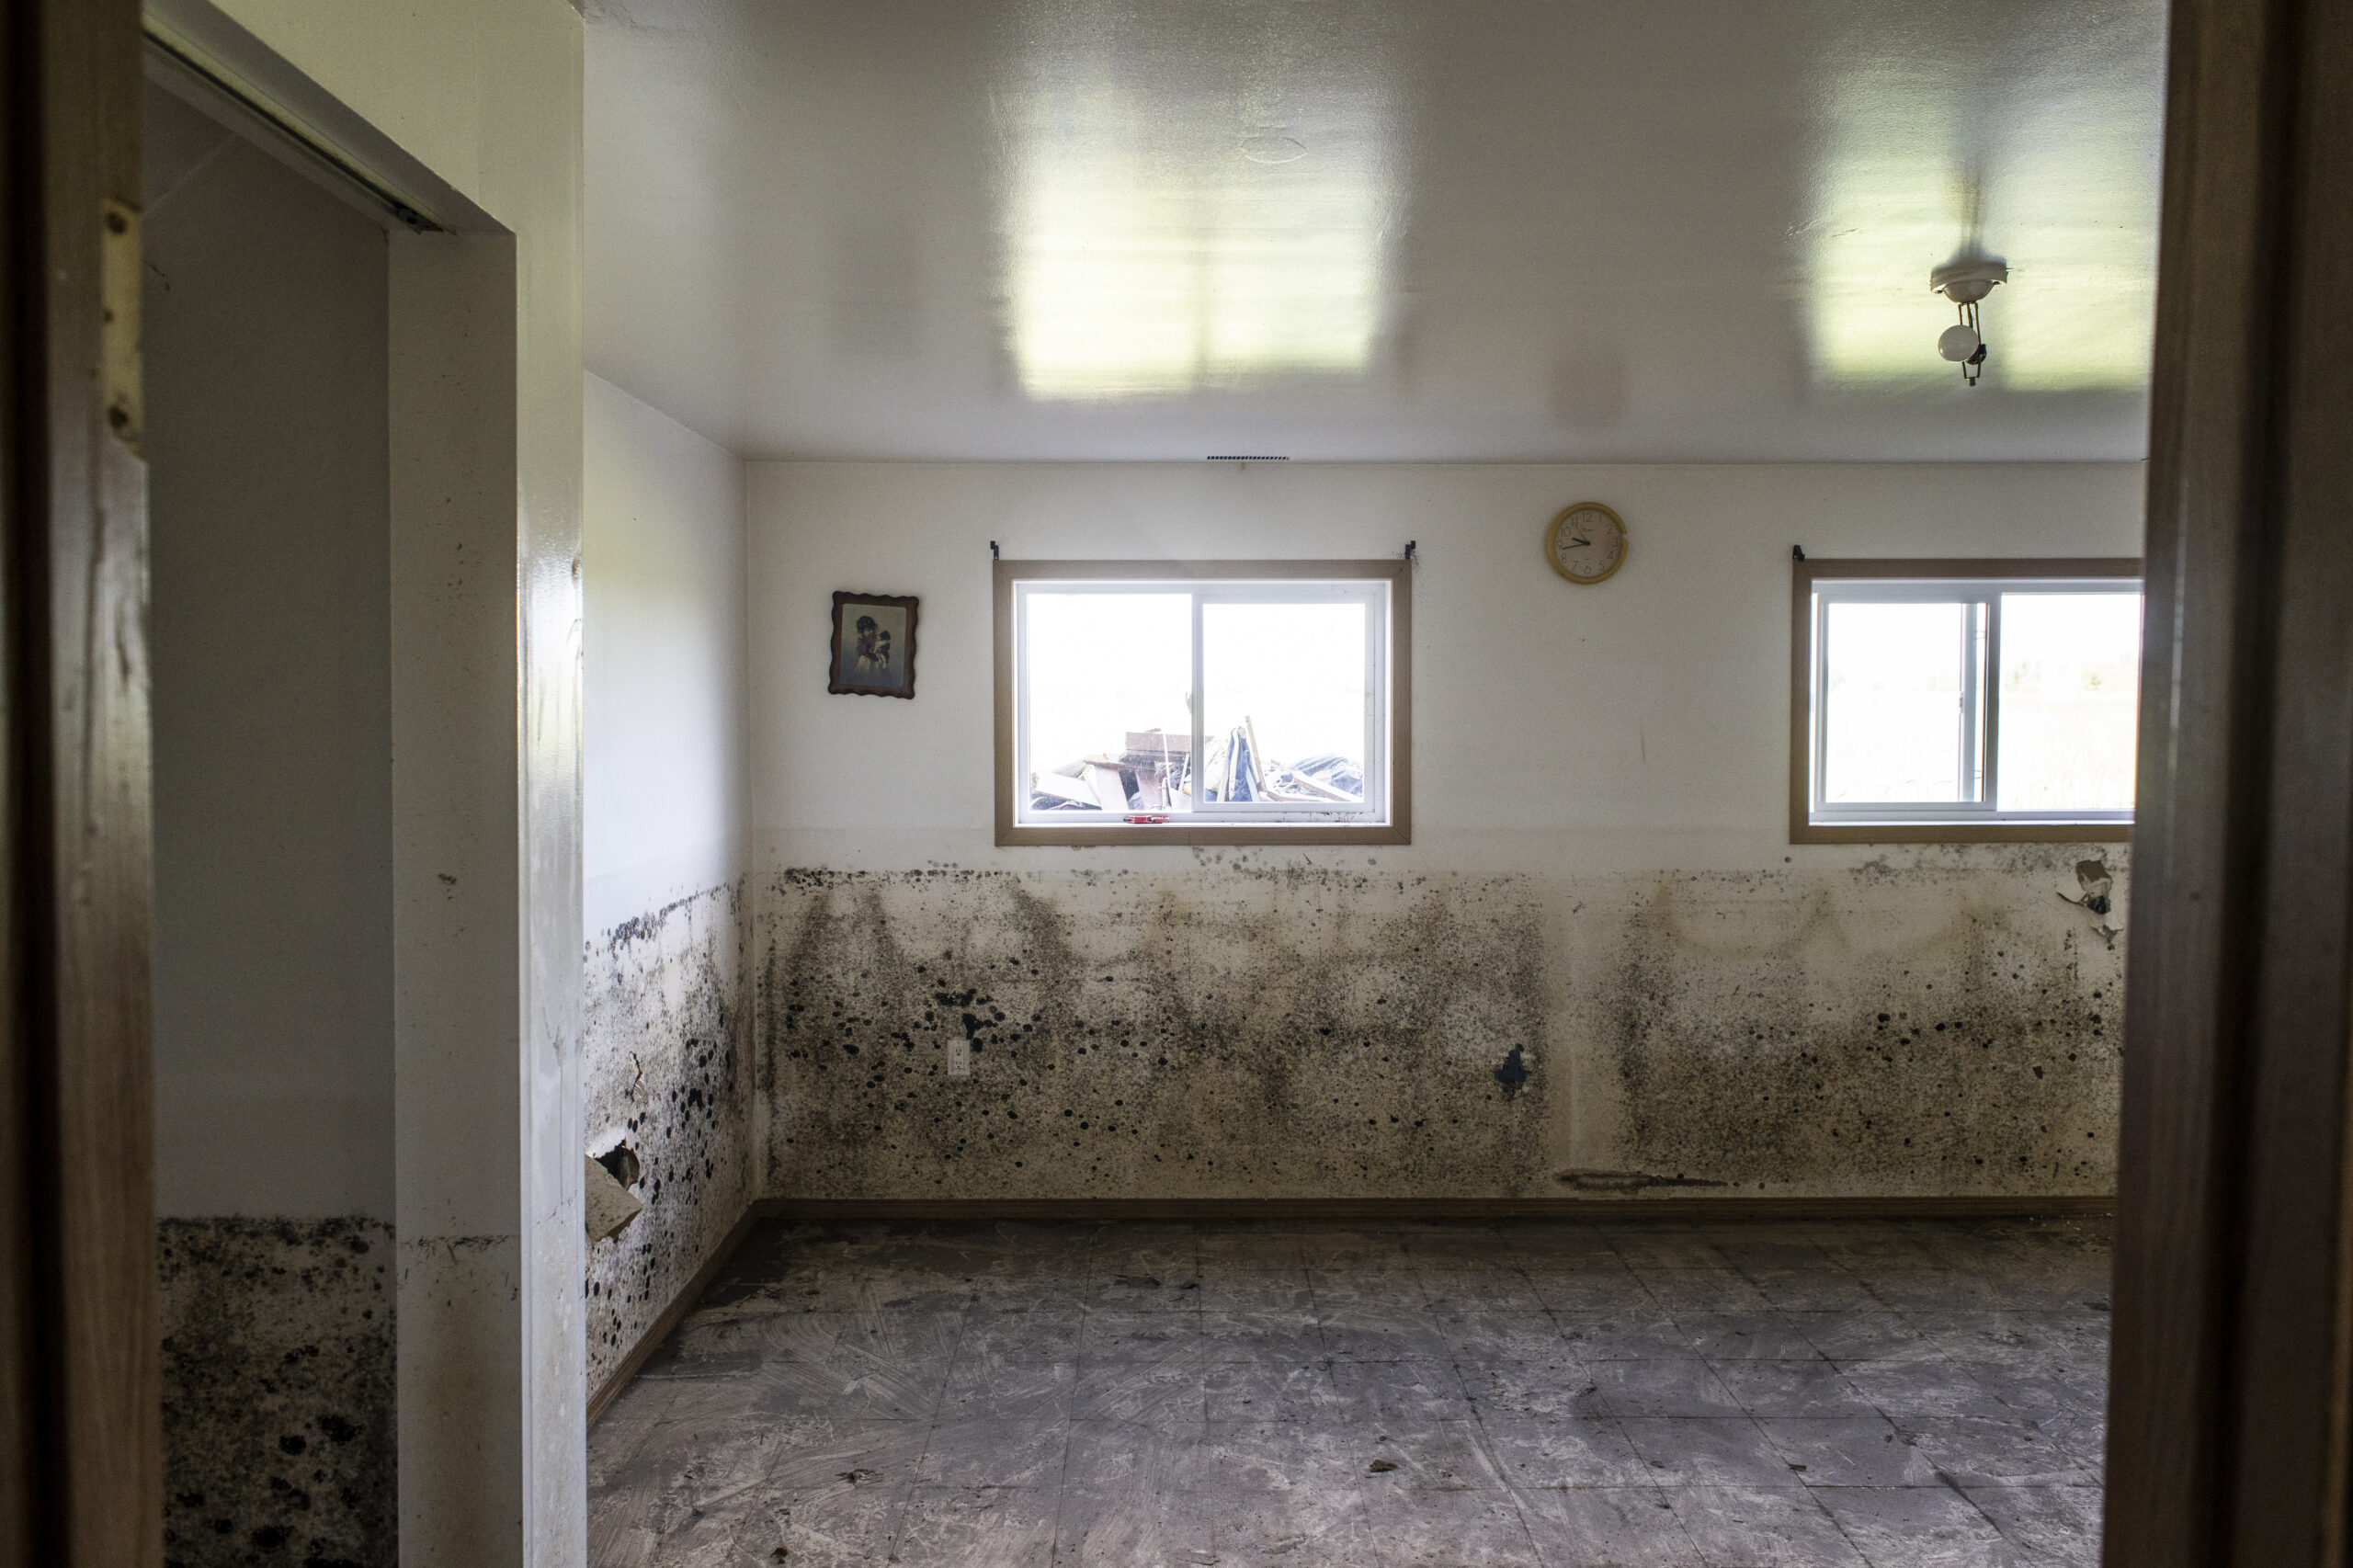 Black mold stains are visible on the walls of a basement room, up to the lower edge of two windows. A clock and small piece of art hang on the walls.